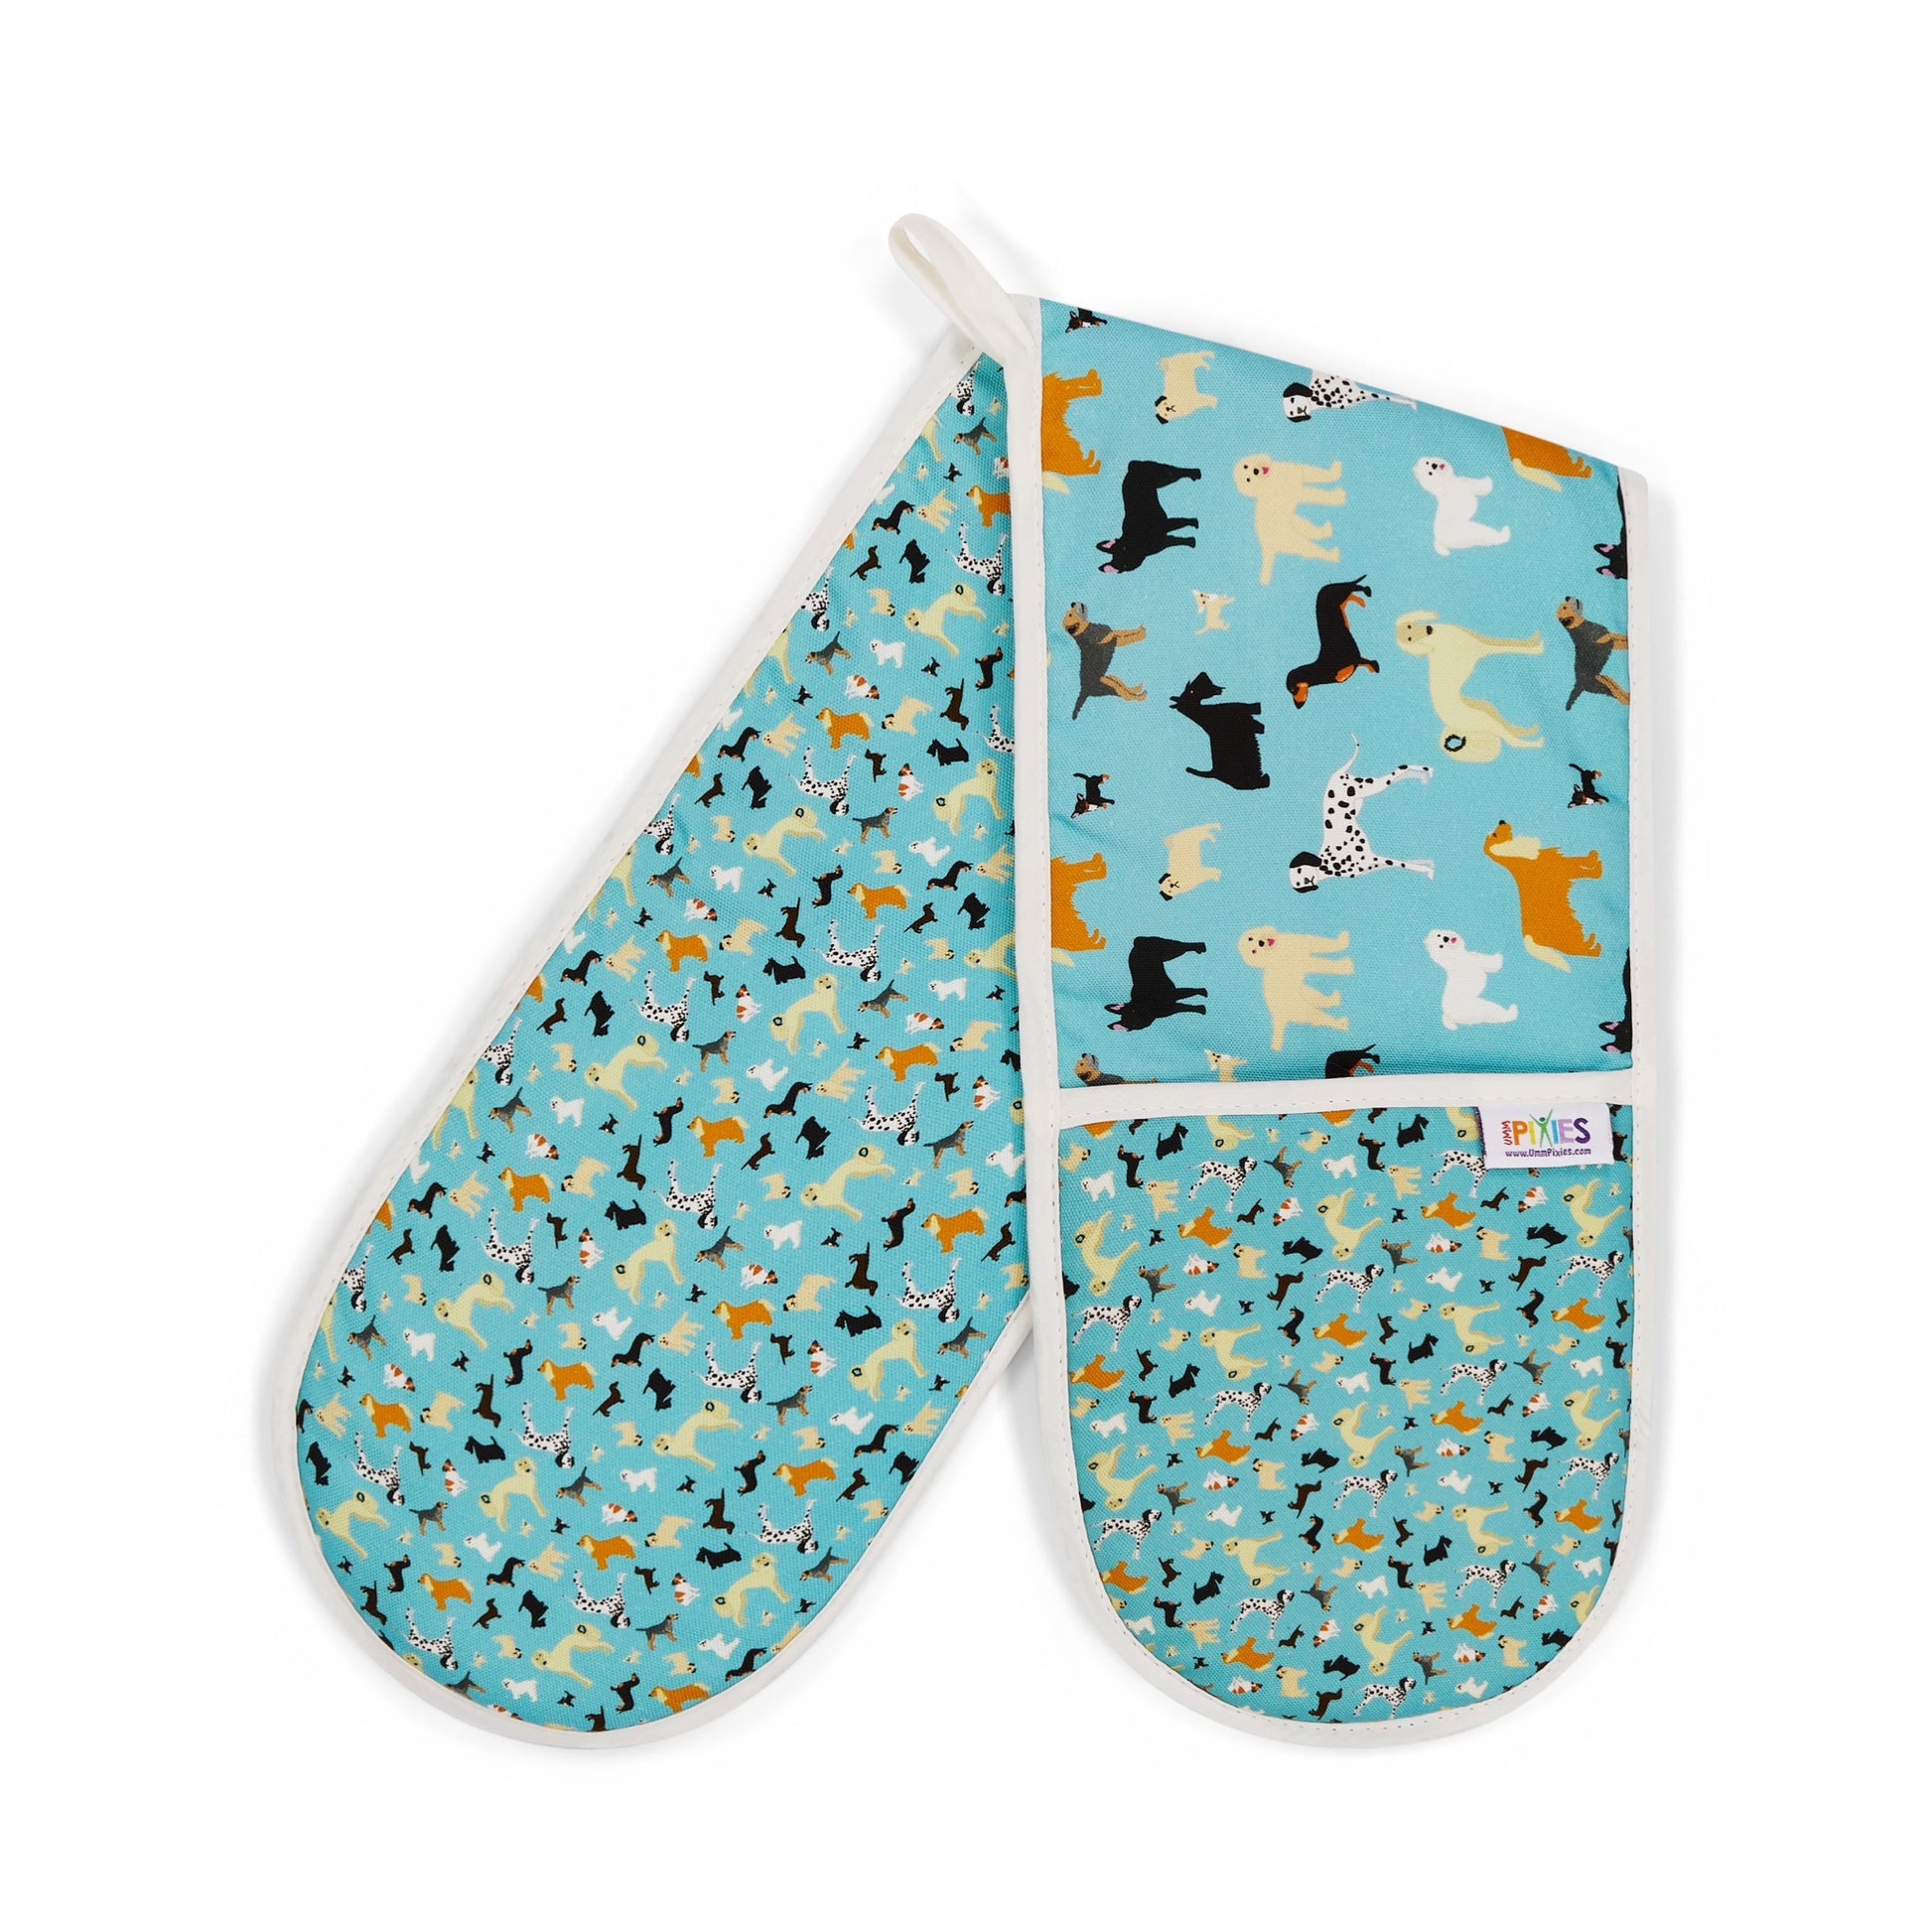 Blue Dogs Oven Gloves in Organic Cotton